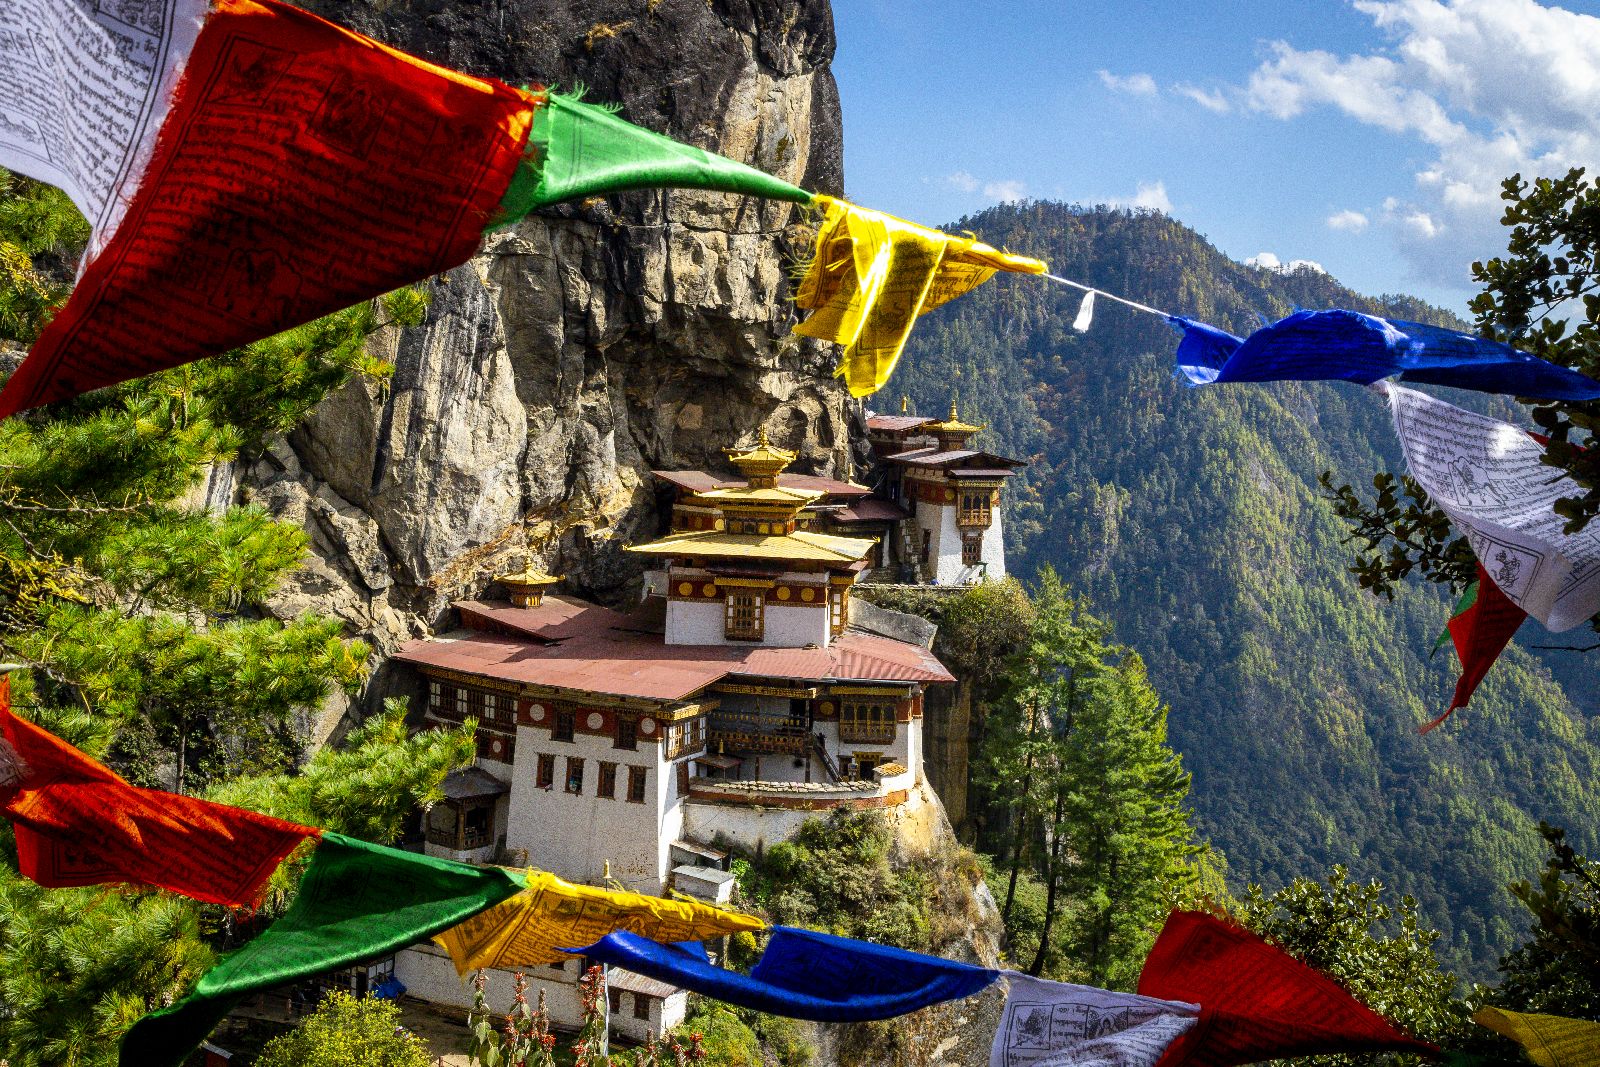 The Tigers Nest Monastery and colourful prayer flags in Bhutan